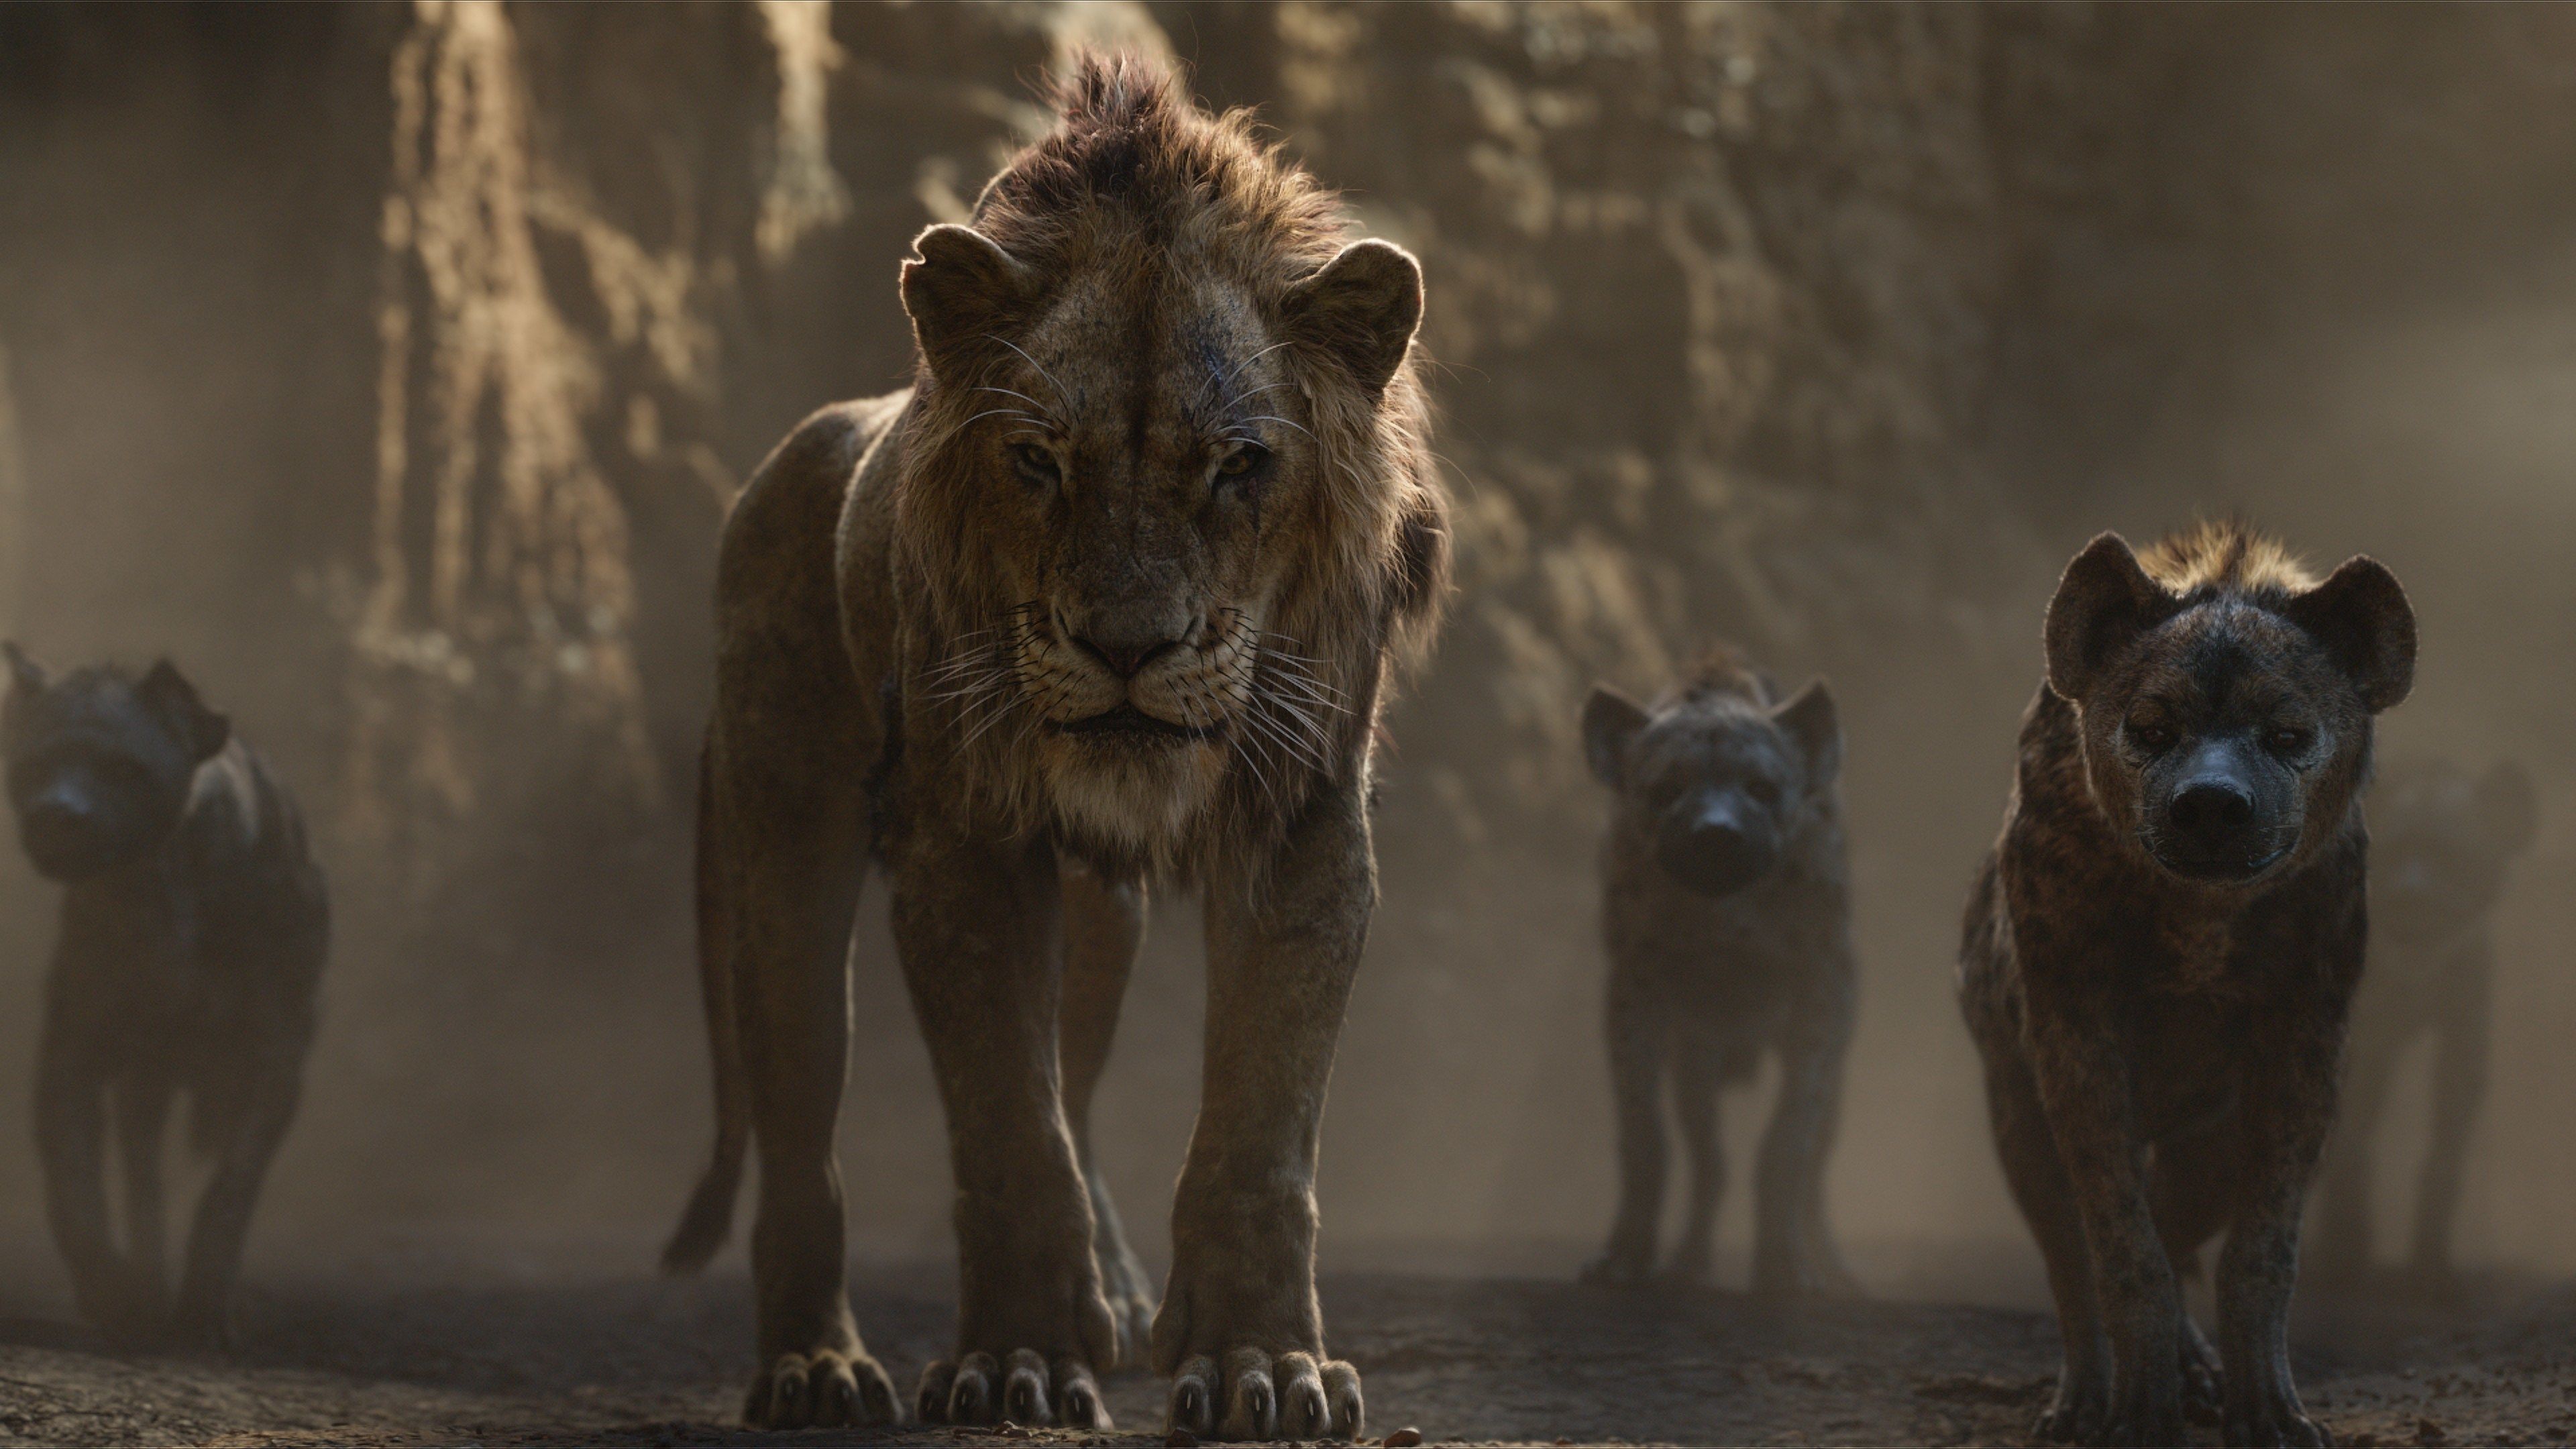 Wallpapers 4k The Lion King 2019 Scar 2019 movies wallpapers, 4k